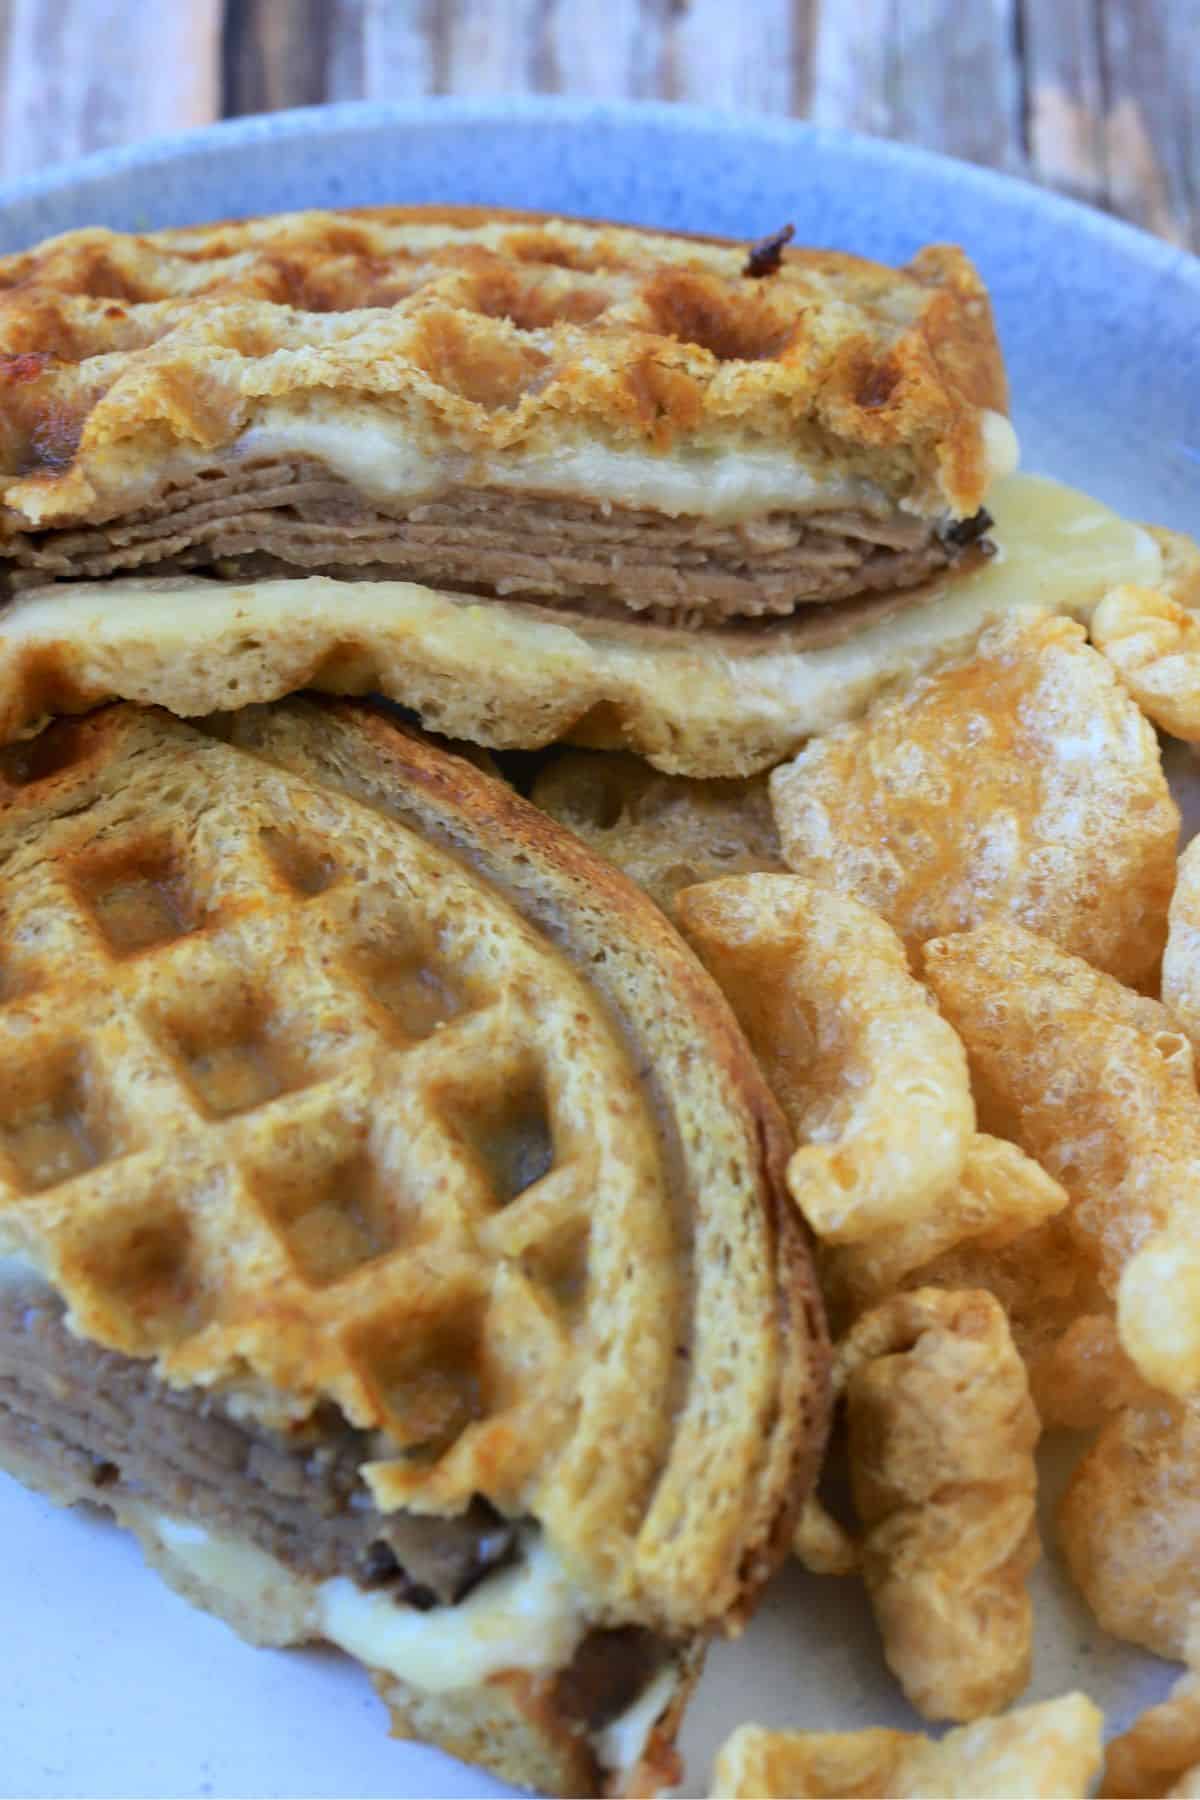 carbonaut waffle sandwich cut in half on a plate with pork rinds.